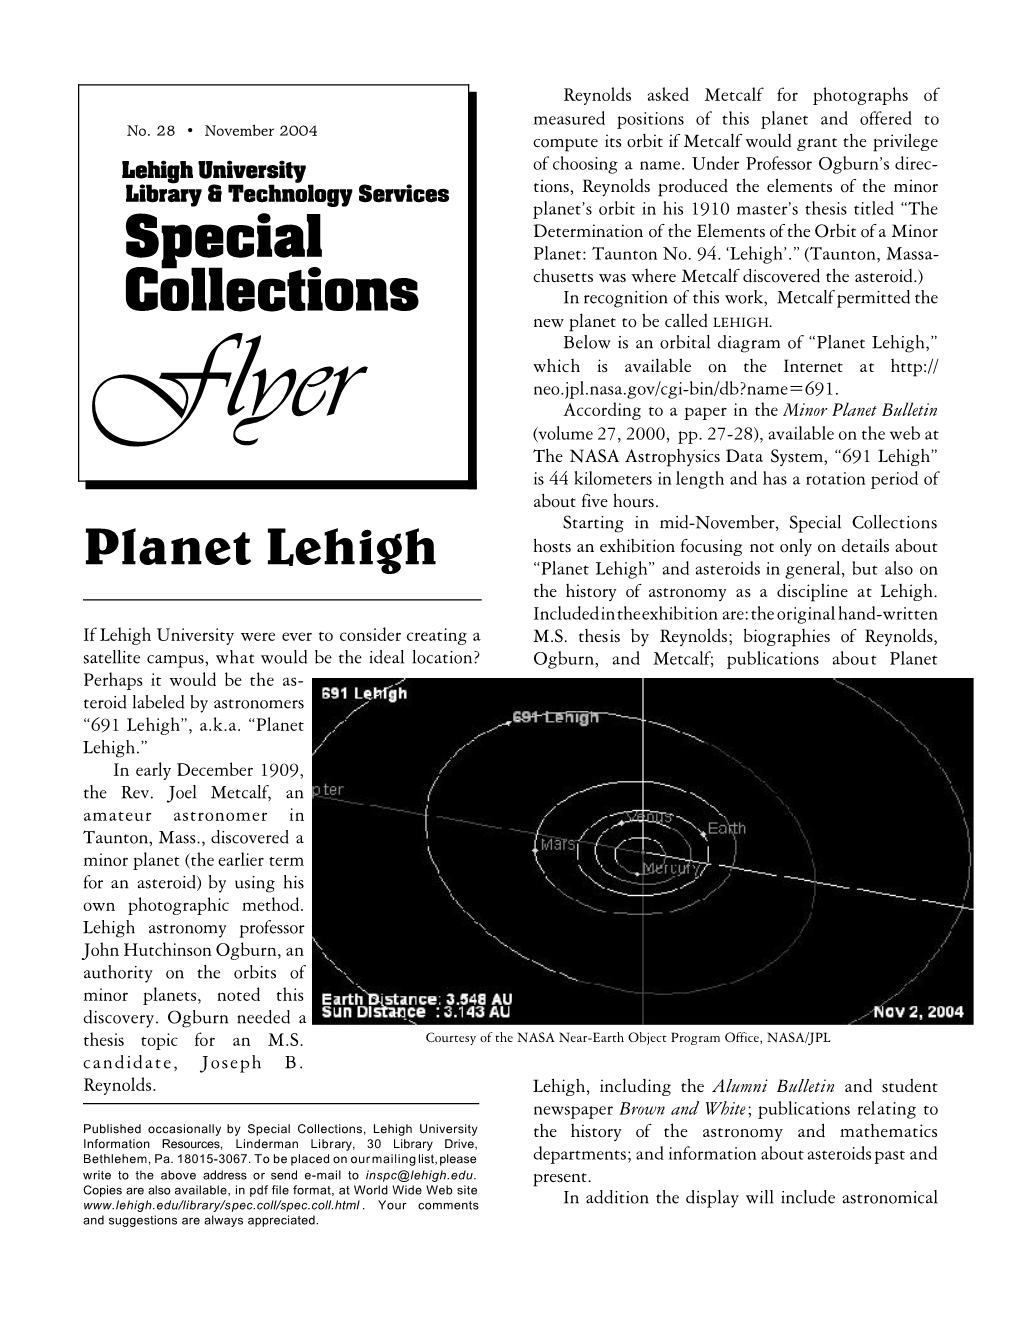 Planet Lehigh,” Which Is Available on the Internet at Neo.Jpl.Nasa.Gov/Cgi-Bin/Db?Name=691